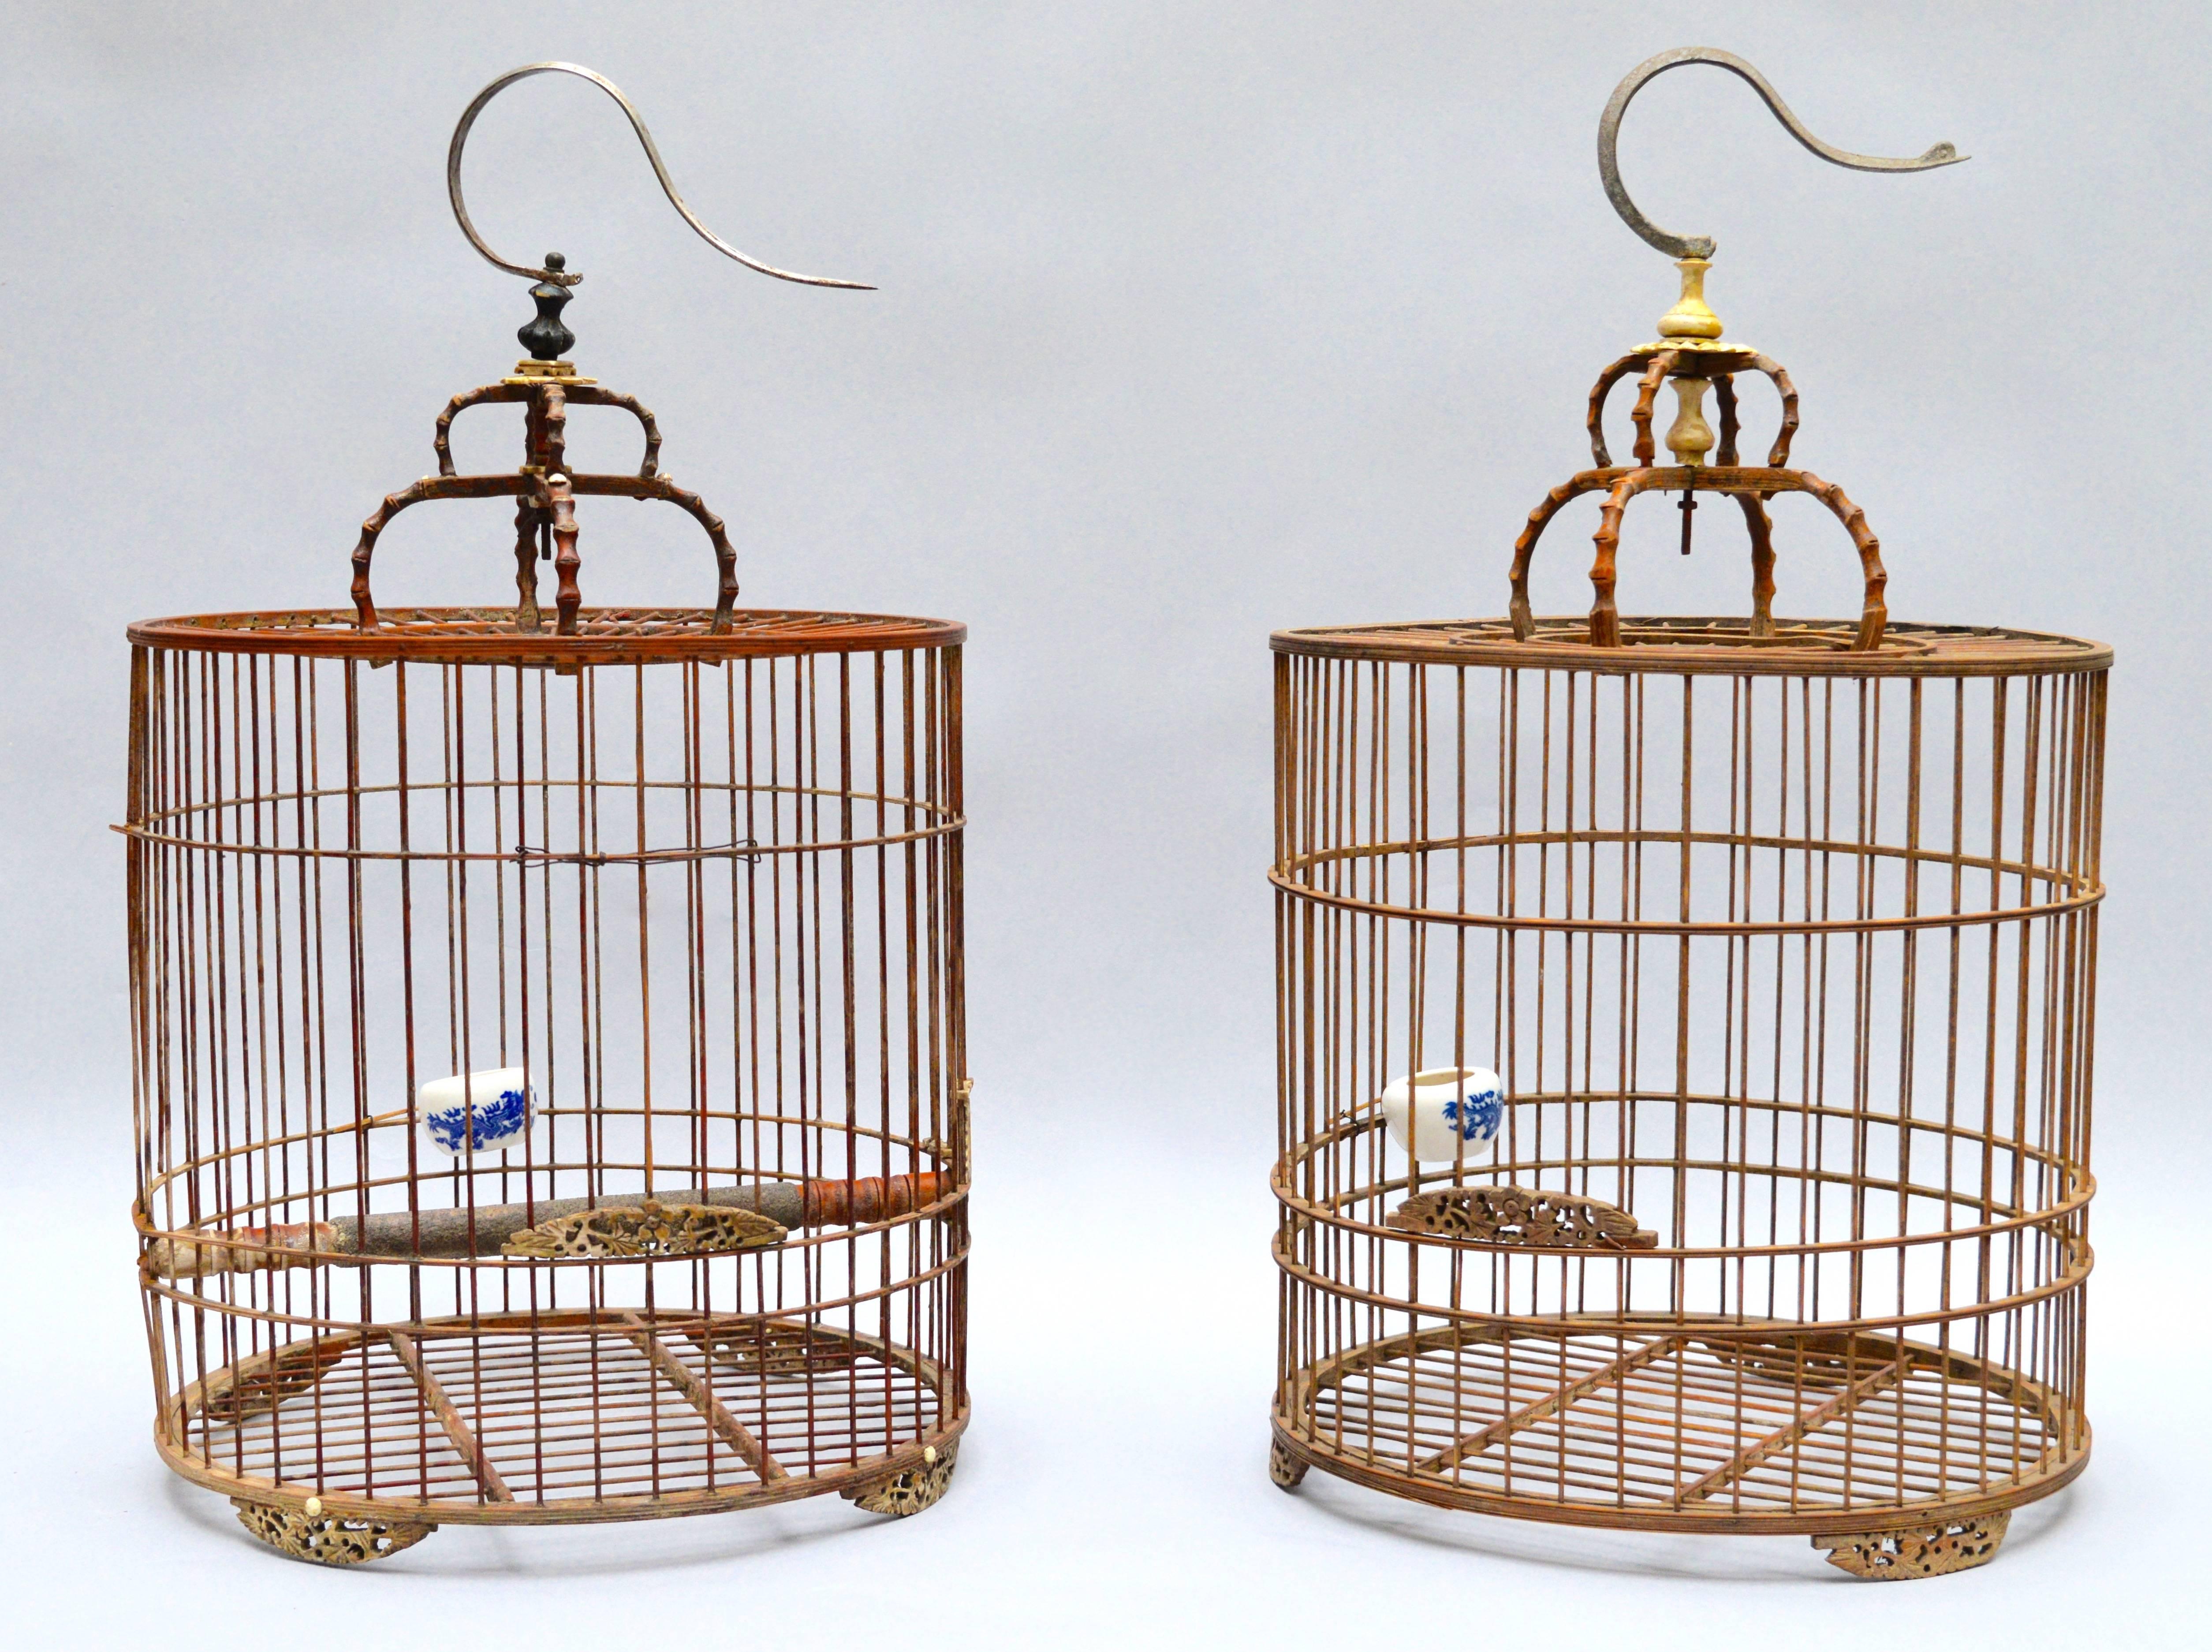 These Chinese birdcages are almost a perfectly matched pair except for the slightly different top finiels (which were replaced in the mid 20th century)
They are made of very light fine bamboo withcarved wood accents and metal hook handles. 
Men in